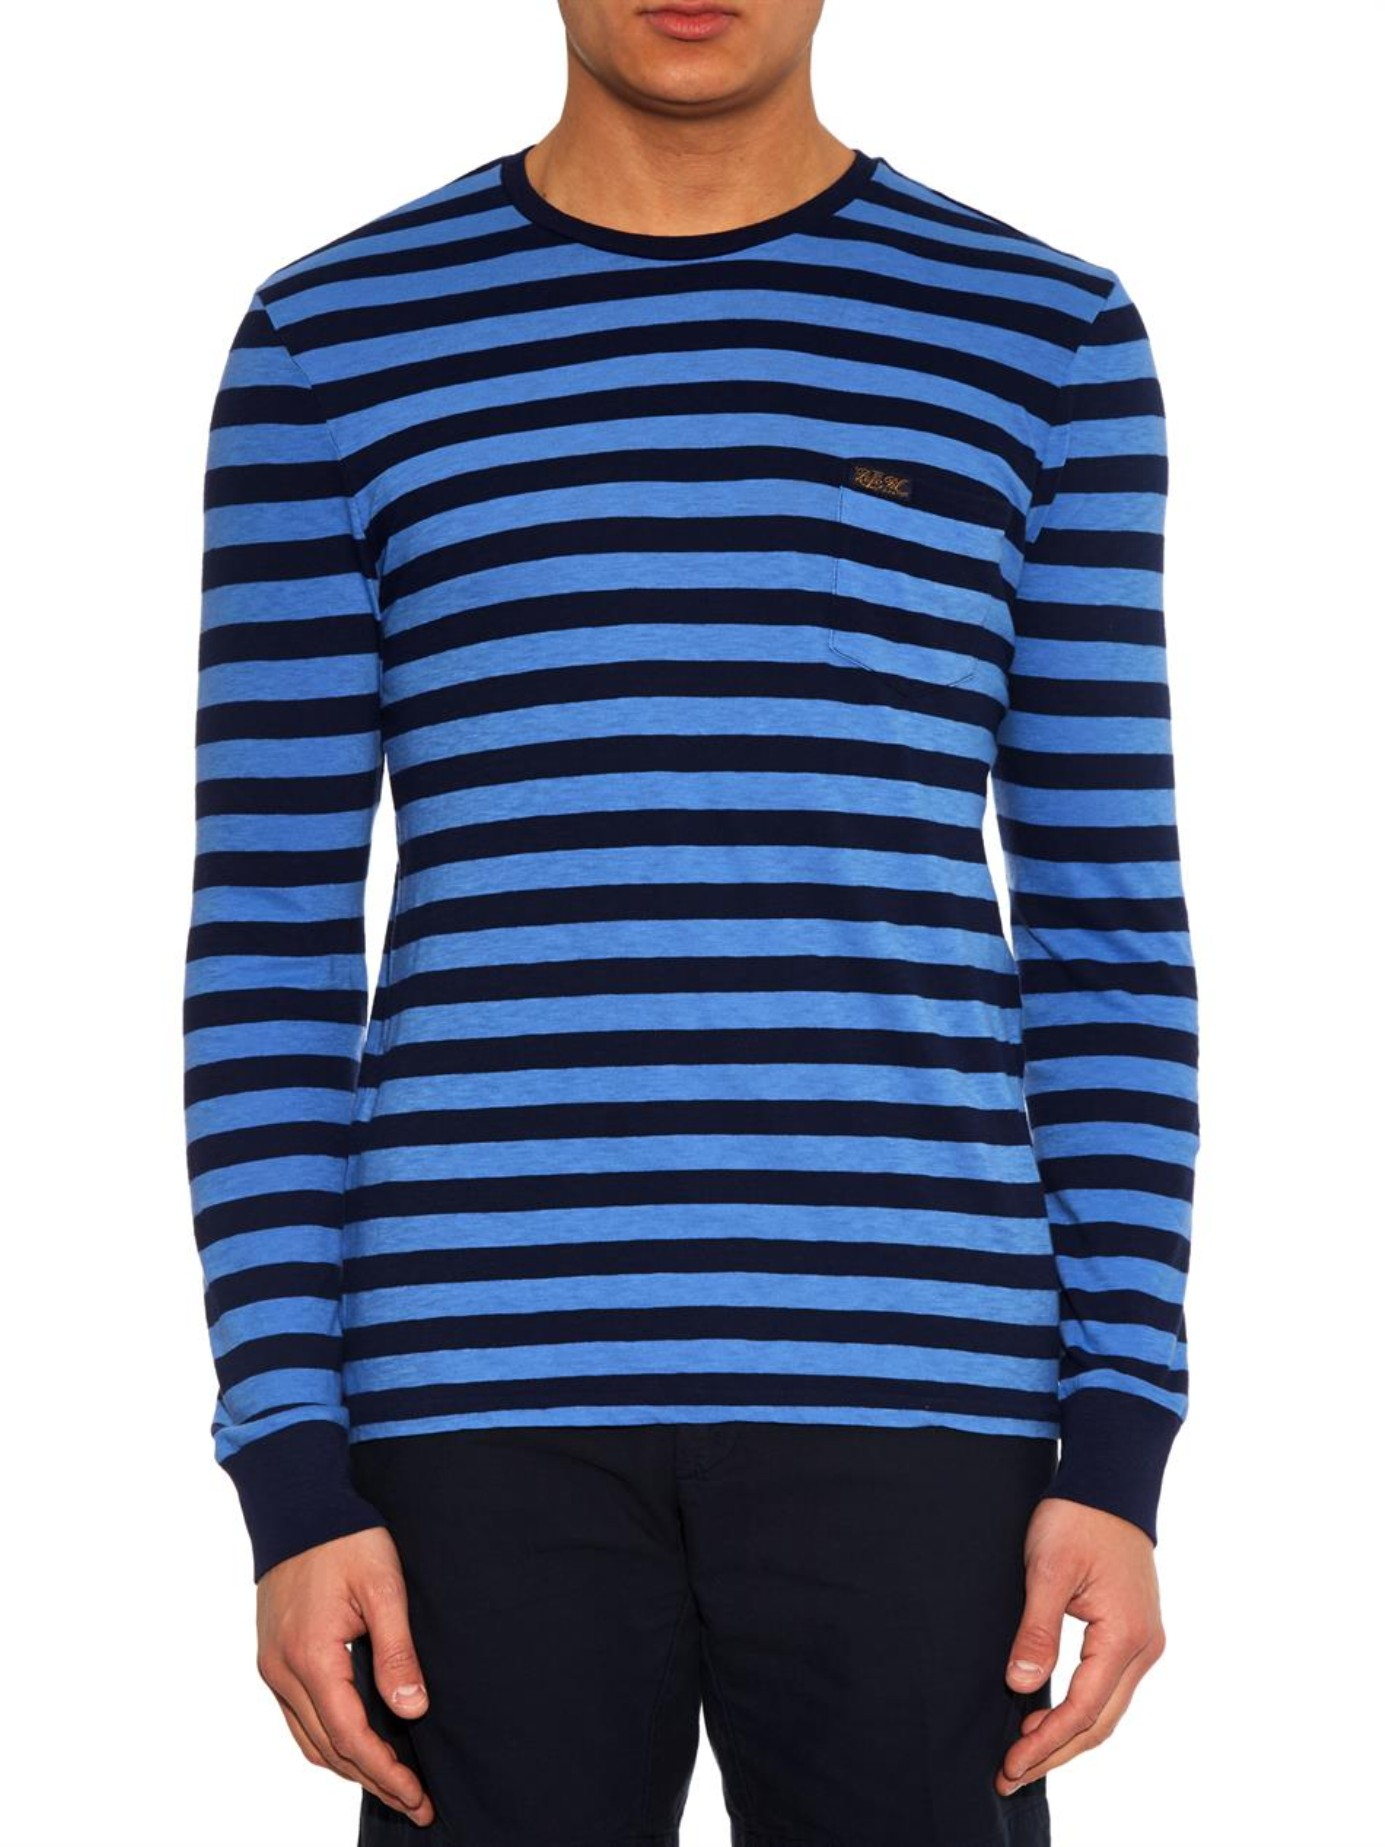 striped shirt jersey sleeved polo ralph lauren multi navy multicolor lyst